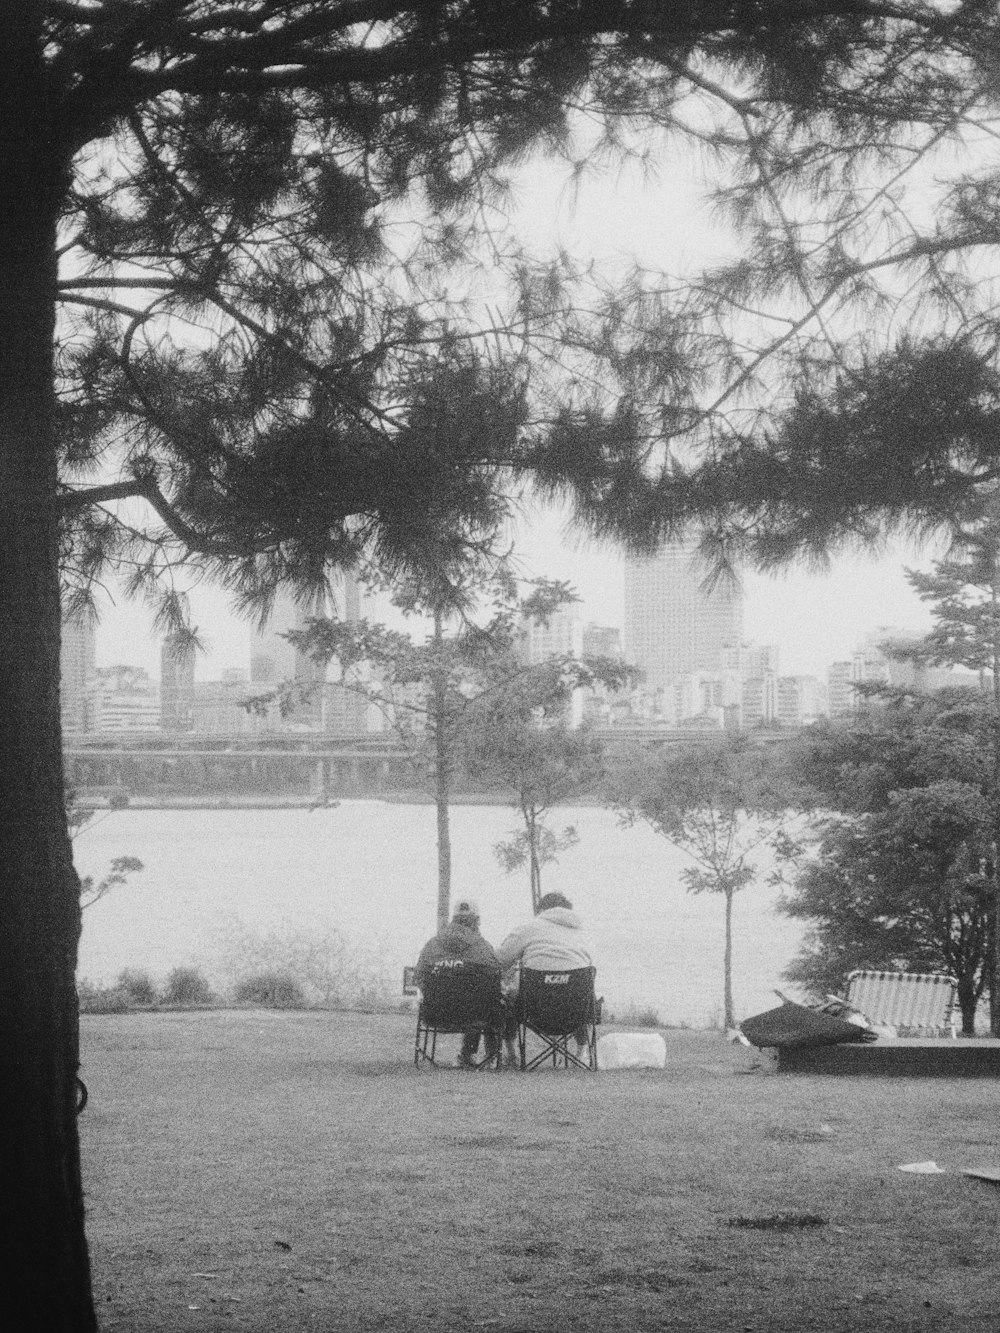 two people sitting on a bench in a park